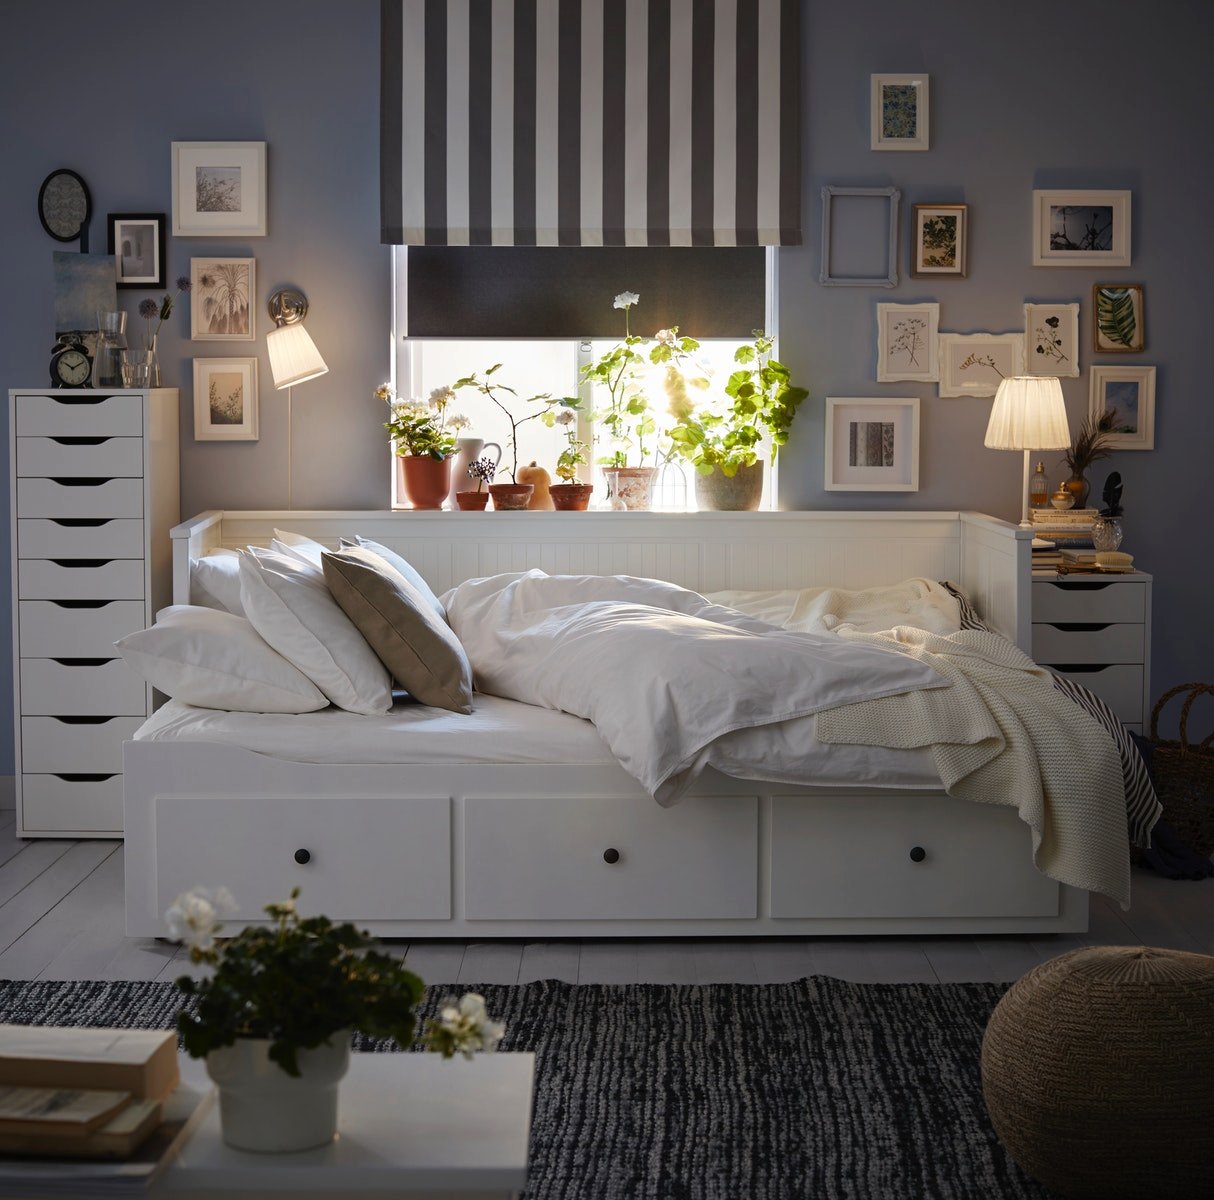 The sample bedroom at the furniture store IKEA